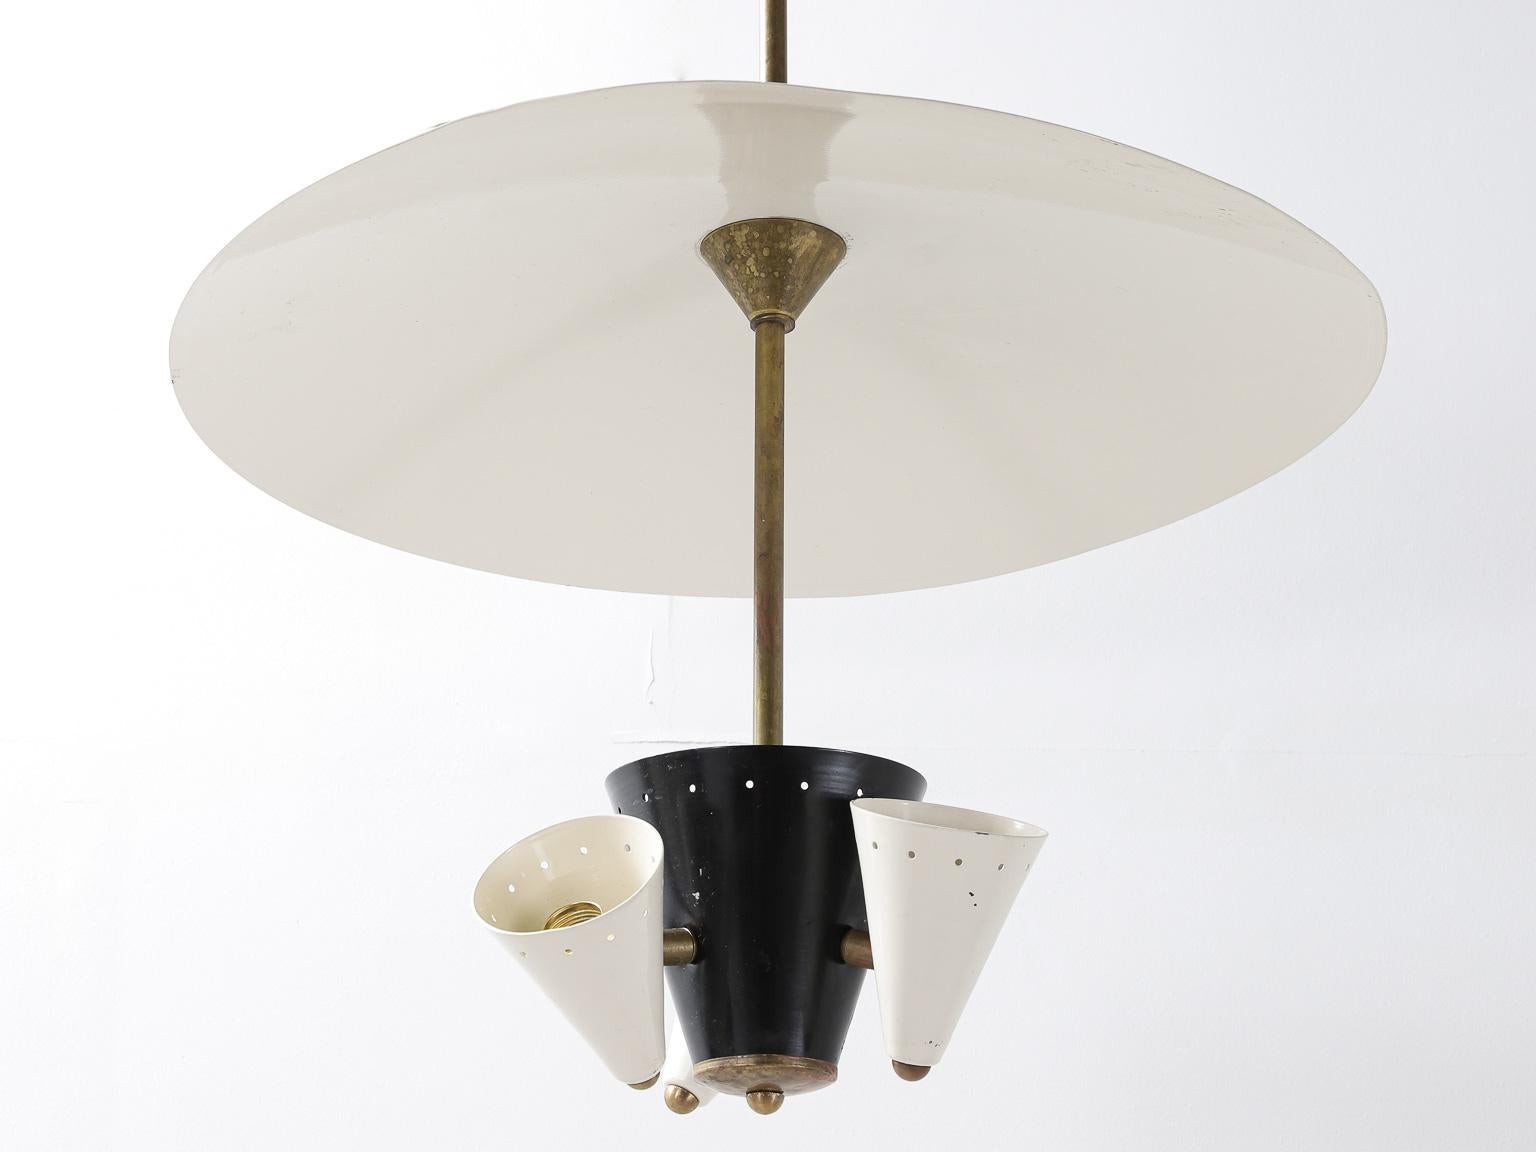 Midcentury Italian ceiling light and diffuser in black and white lacquered metal and brass structure.